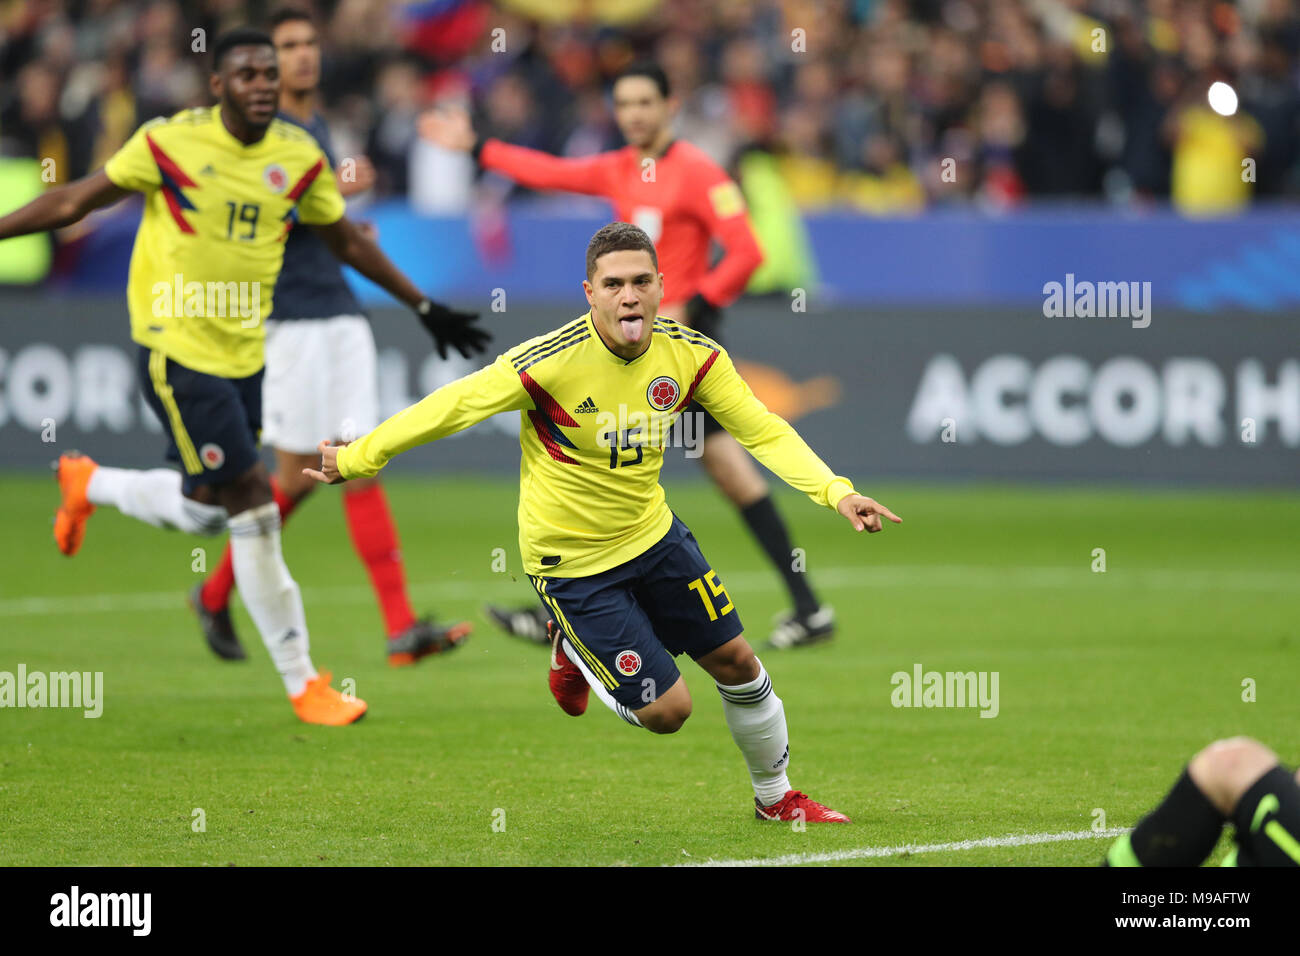 Juan Fernando Quintero (COL), MARCH 23, 2018 - Football / Soccer : International friendly match between France 2-3 Colombia at Stade de France in Saint-Denis, France, (Photo by AFLO)  3 Stock Photo